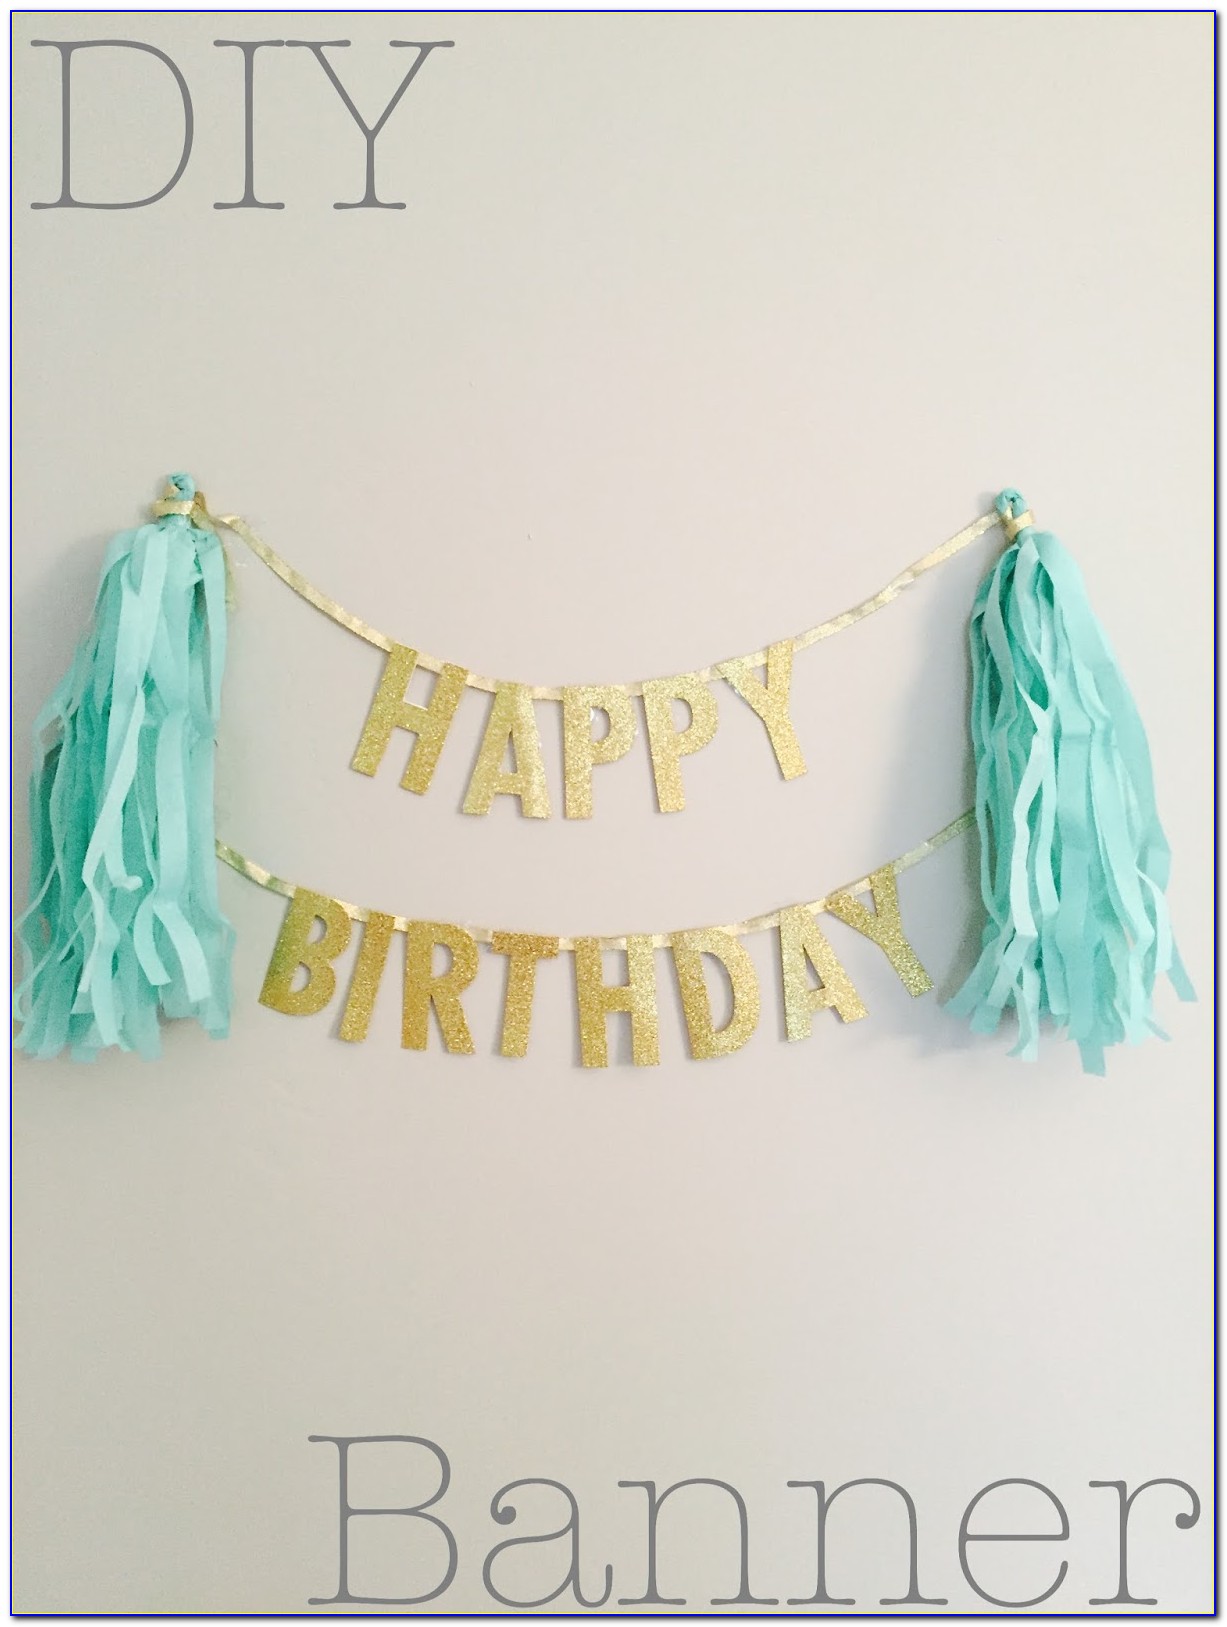 Happy Birthday Banner Template For Cake